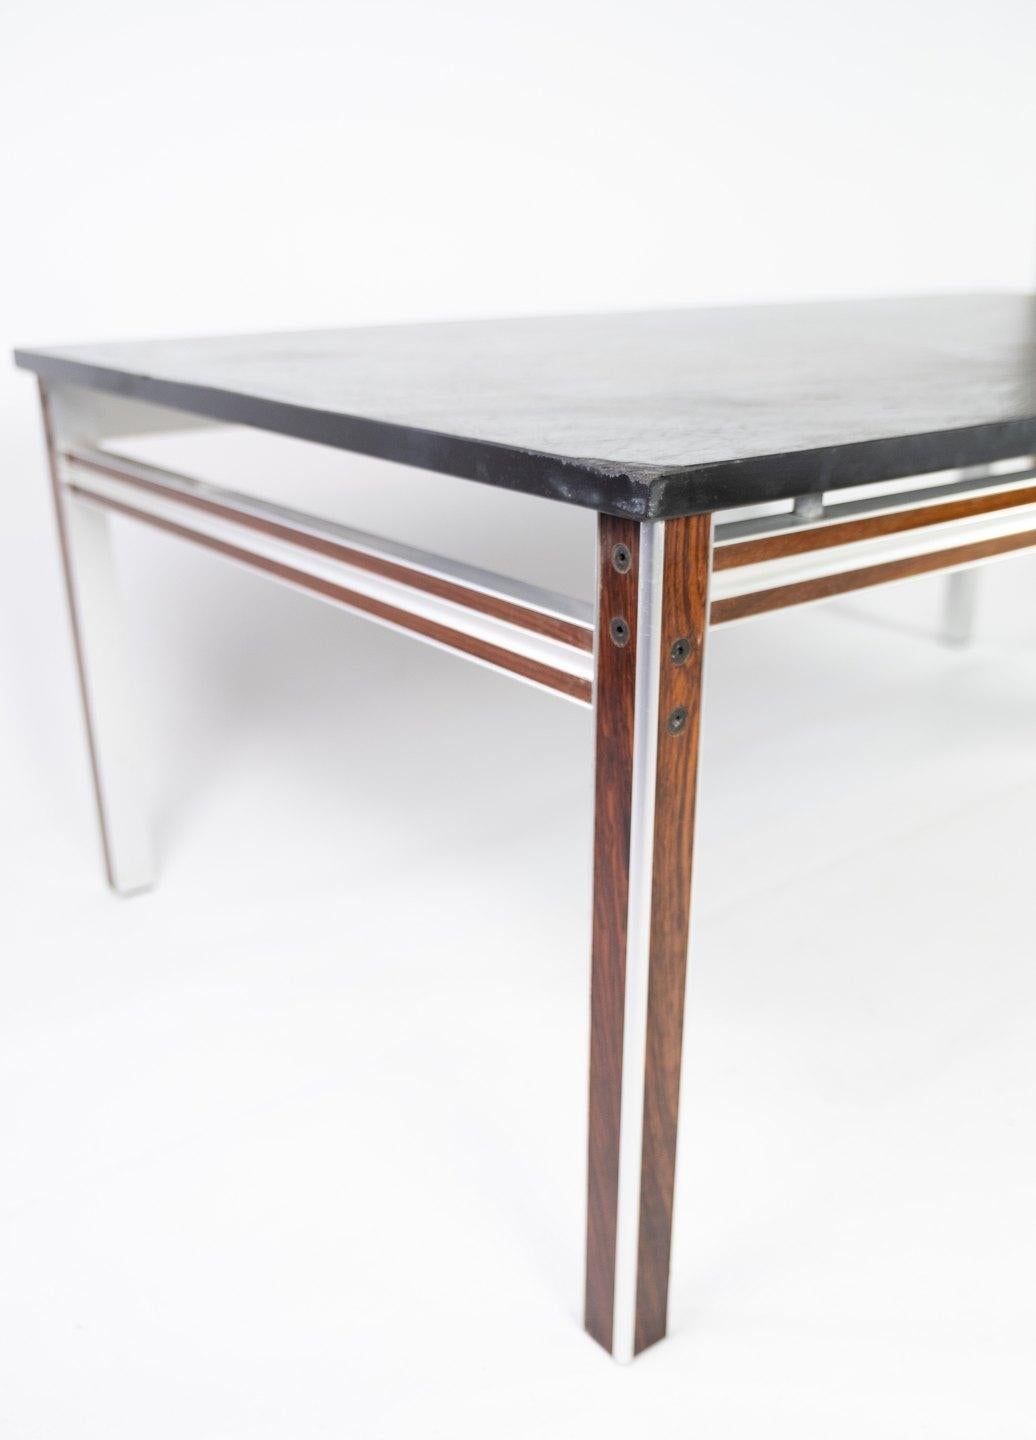 Mid-Century Modern Coffee Table With Black Slate Plate & Frame In Rosewood From 1970s For Sale